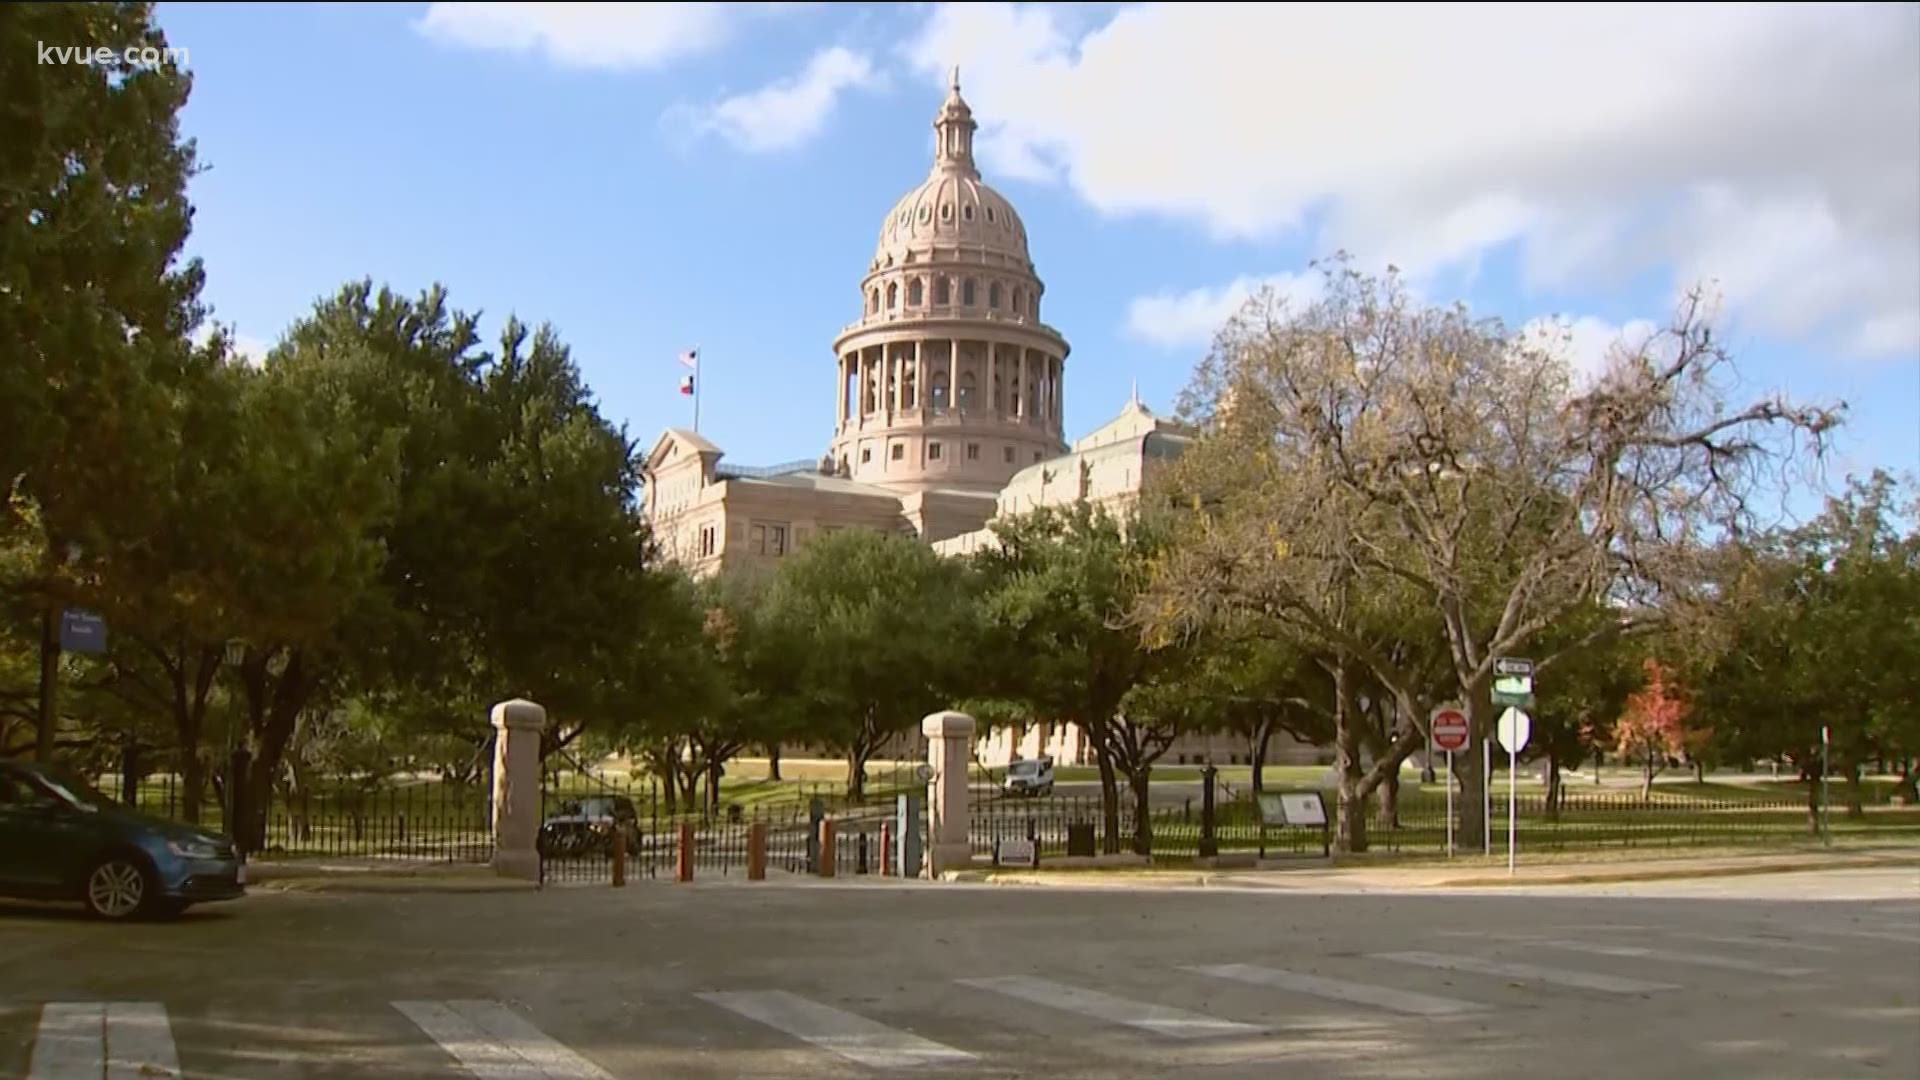 Billions of dollars were spent by the State in response to the pandemic. The KVUE Defenders followed the money to see what the State bought with your tax dollars.